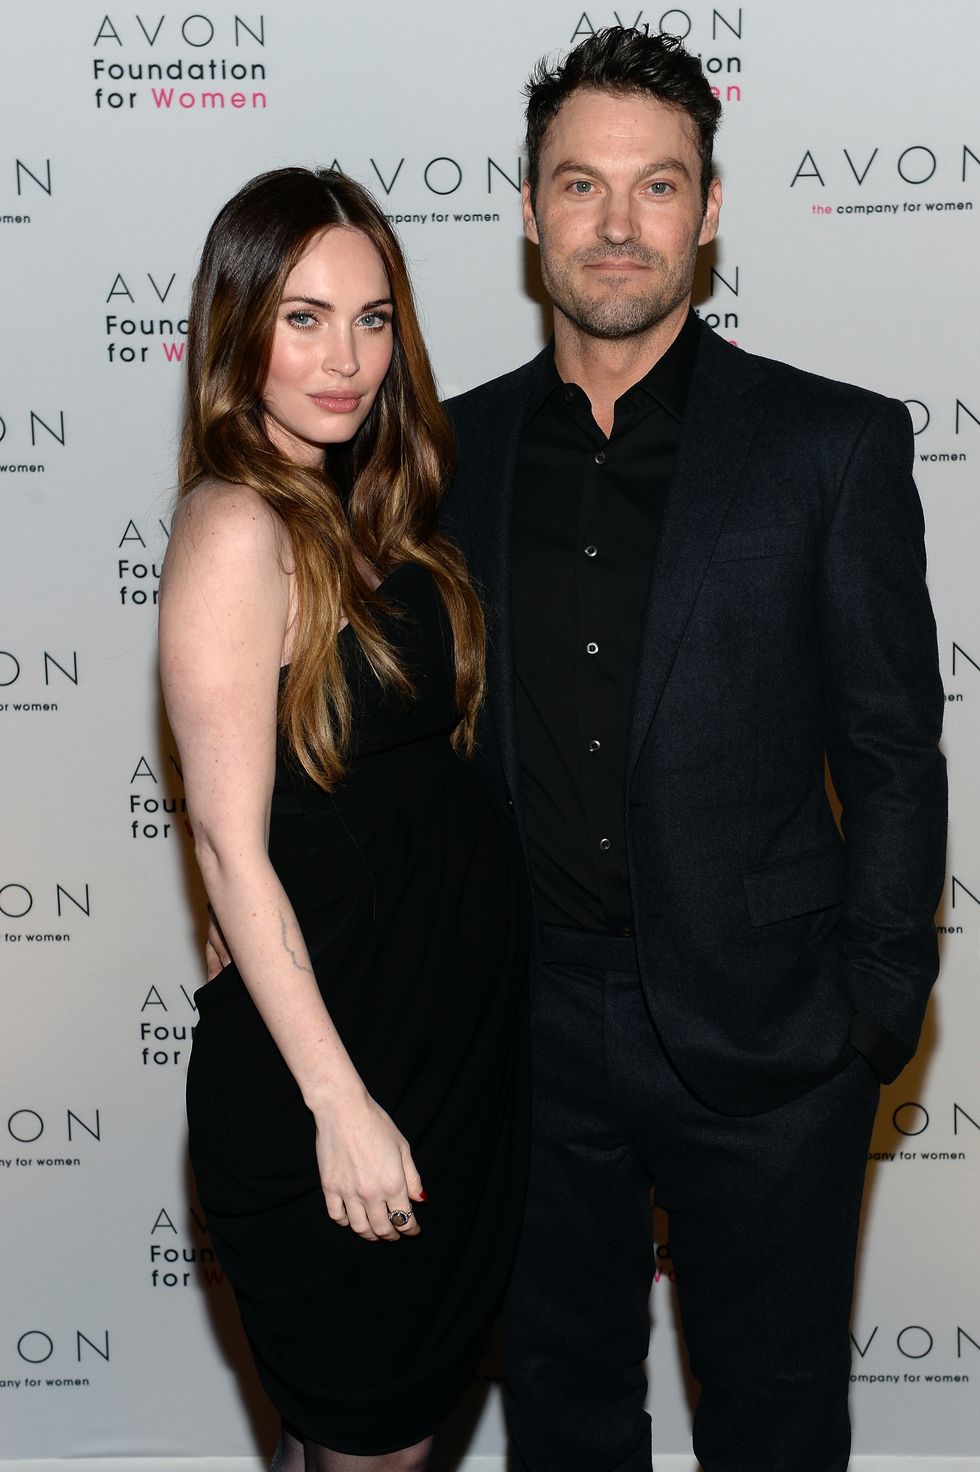 megan fox helps avon foundation launch seethesigns of domestic violence campaign
november 25, 2013 – the morgan library  museum